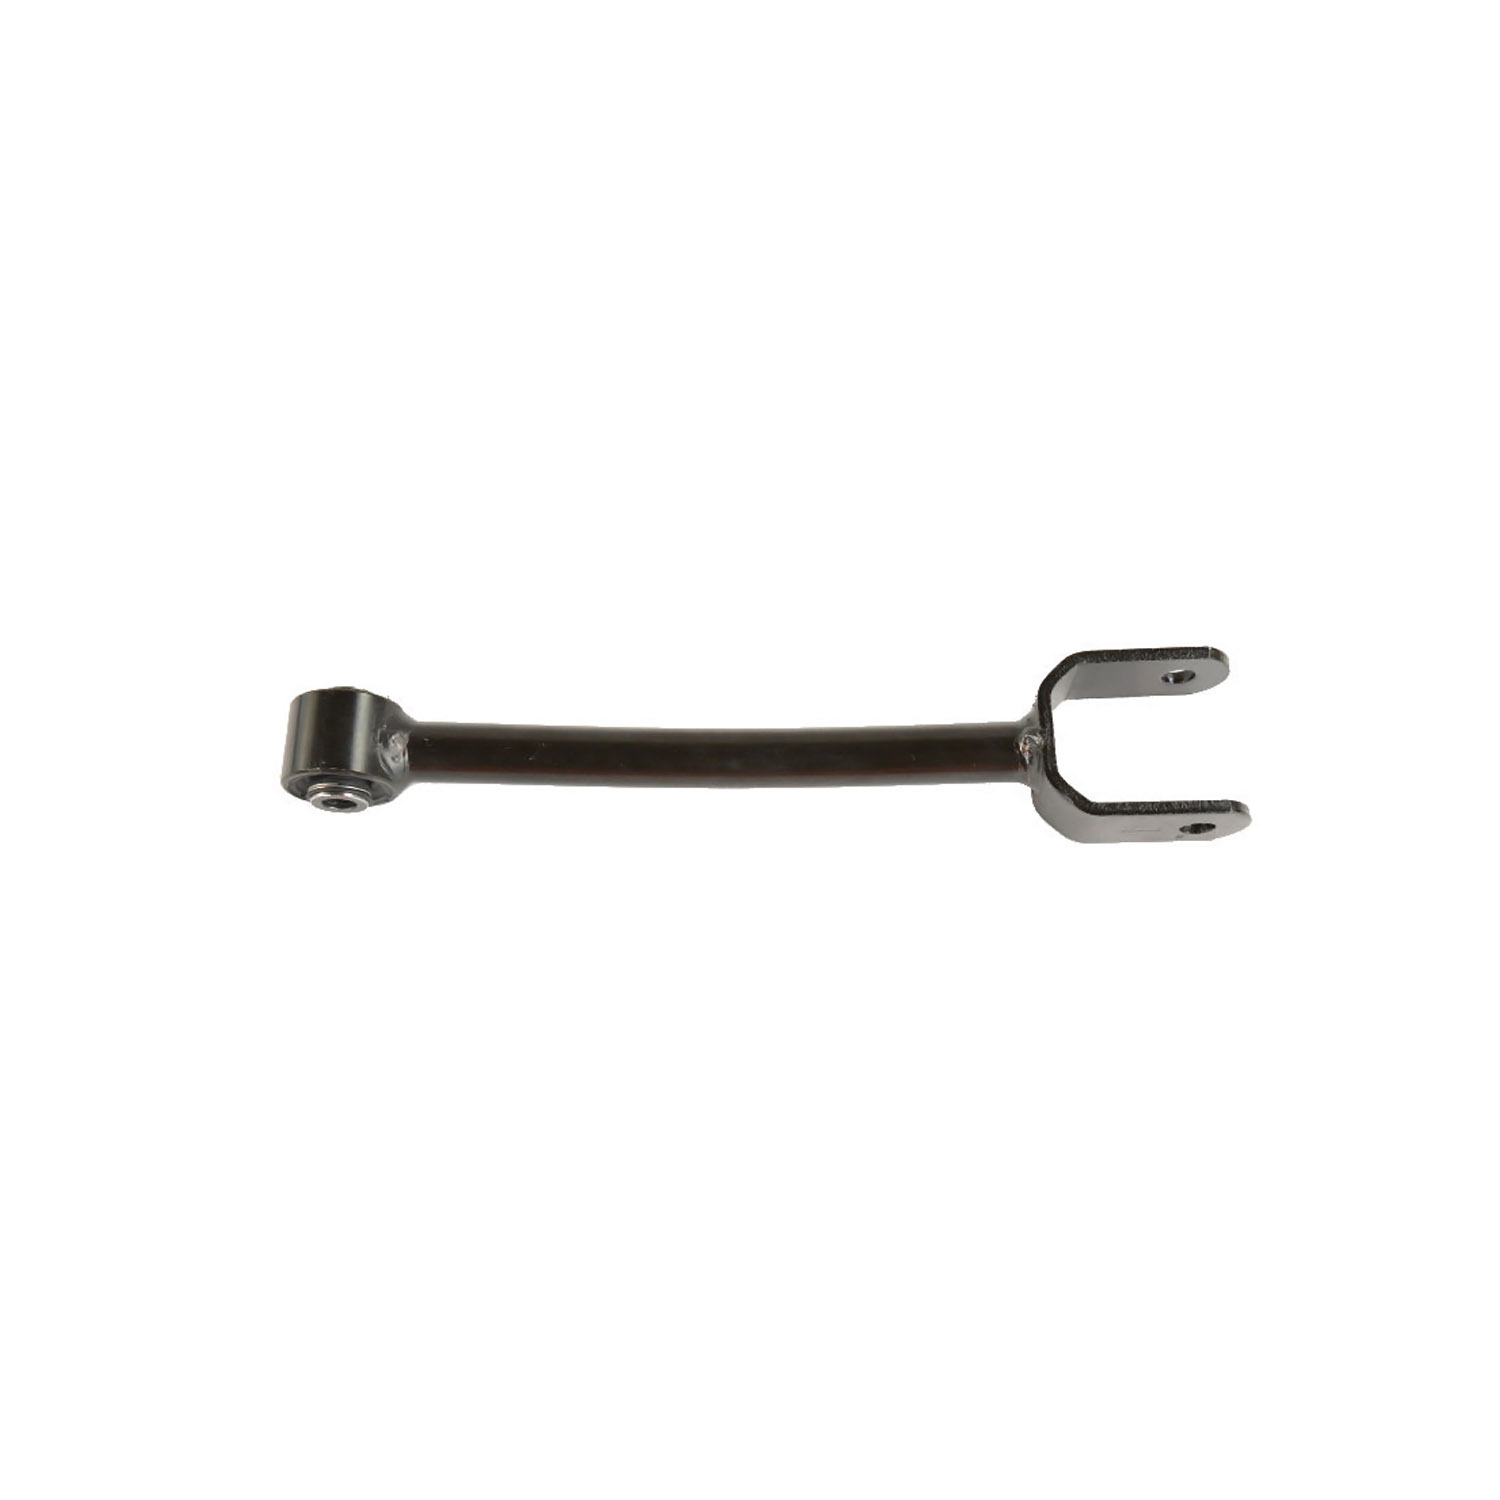 MOPAR PARTS - Alignment Camber Lateral Link - MOP 68079539AE